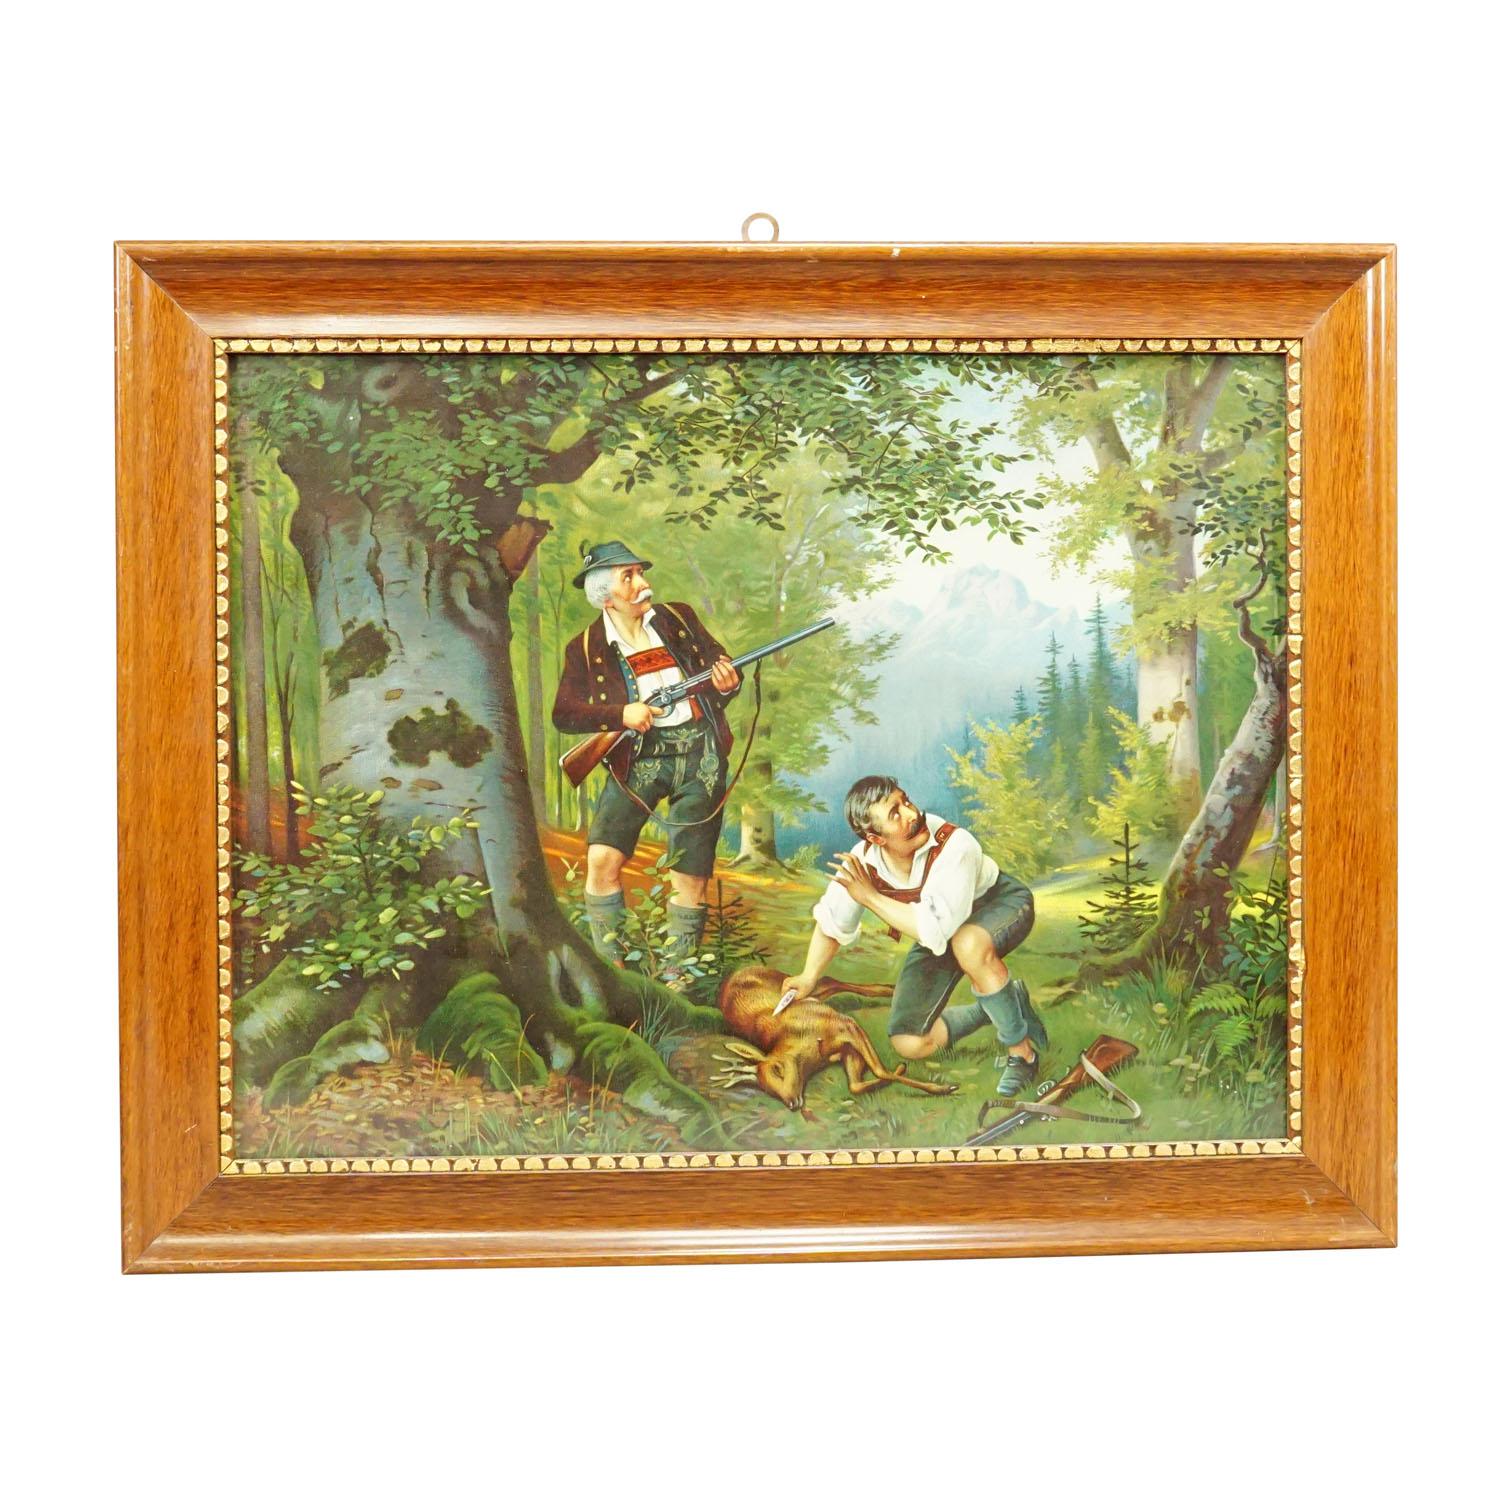 Antique Oil Print with Black Forest Poacher Scene after Josef Ringeisen

A colorful oil print depicting a dramatic poaching scenery in the Bavarian forest. Two poachers are caught in the act by the hunter. The template for this print is a famous